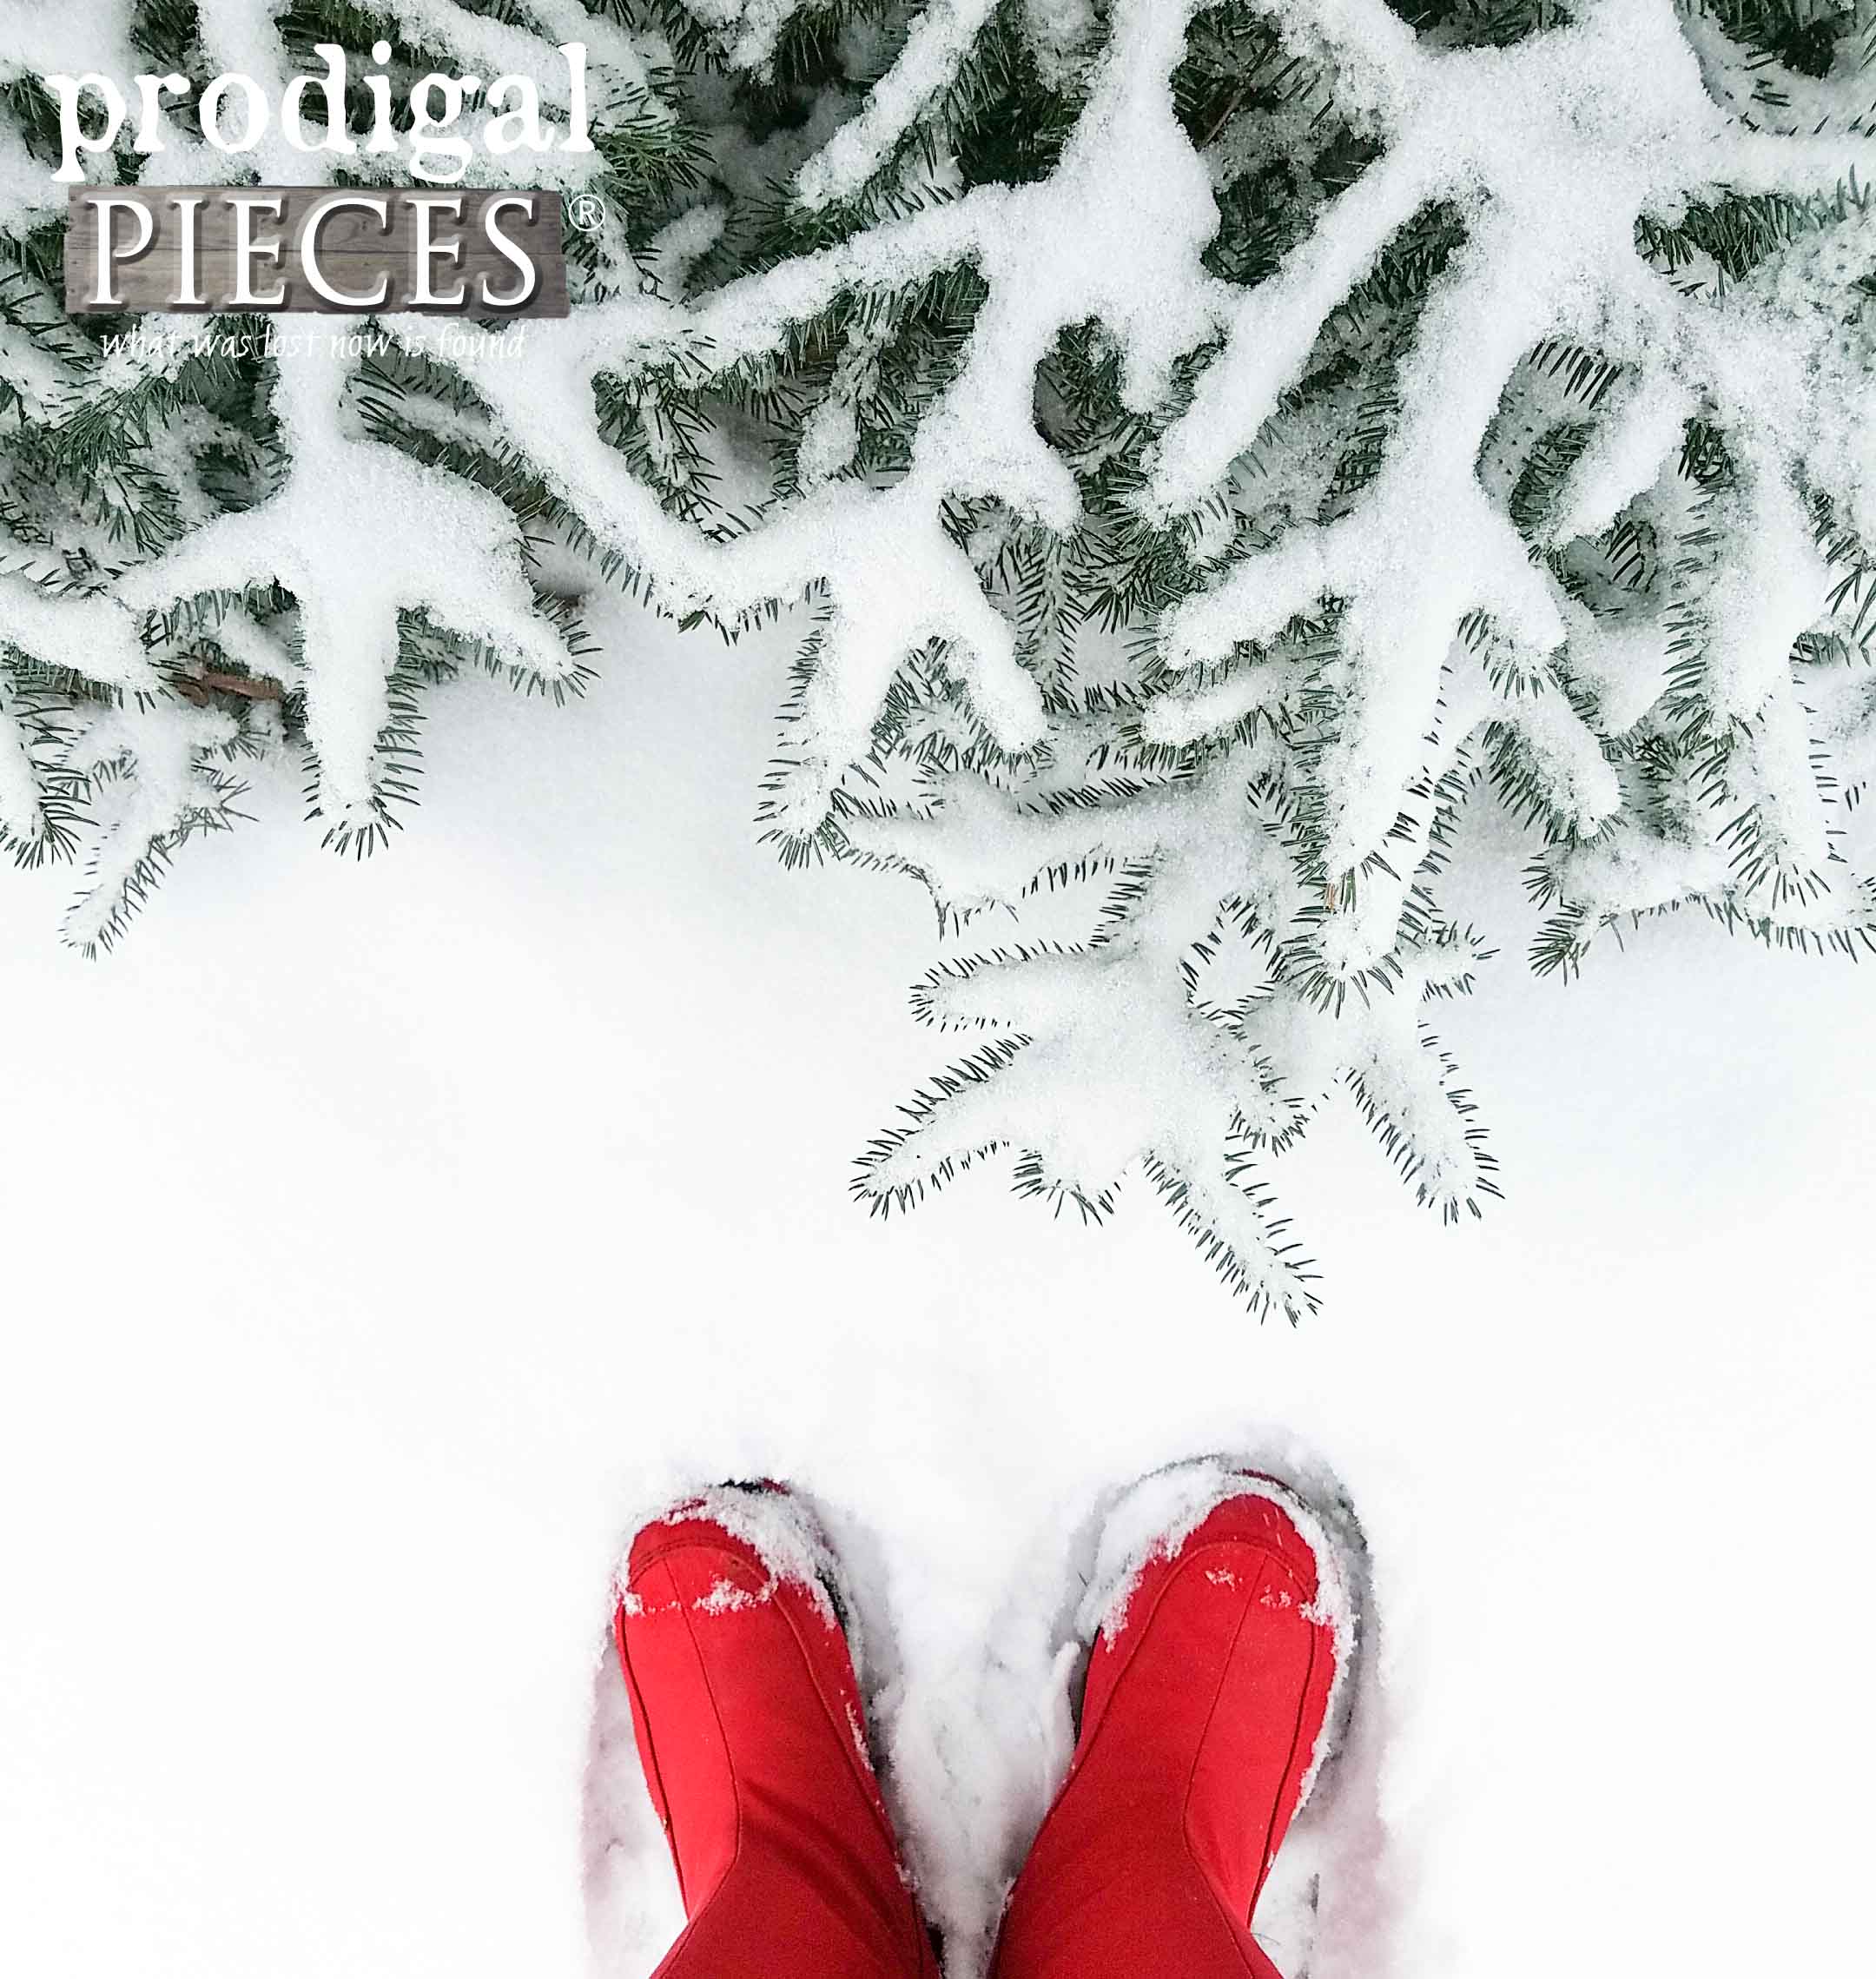 Red Boots in Fresh Fallen Snow | Prodigal Pieces | prodigalpieces.com